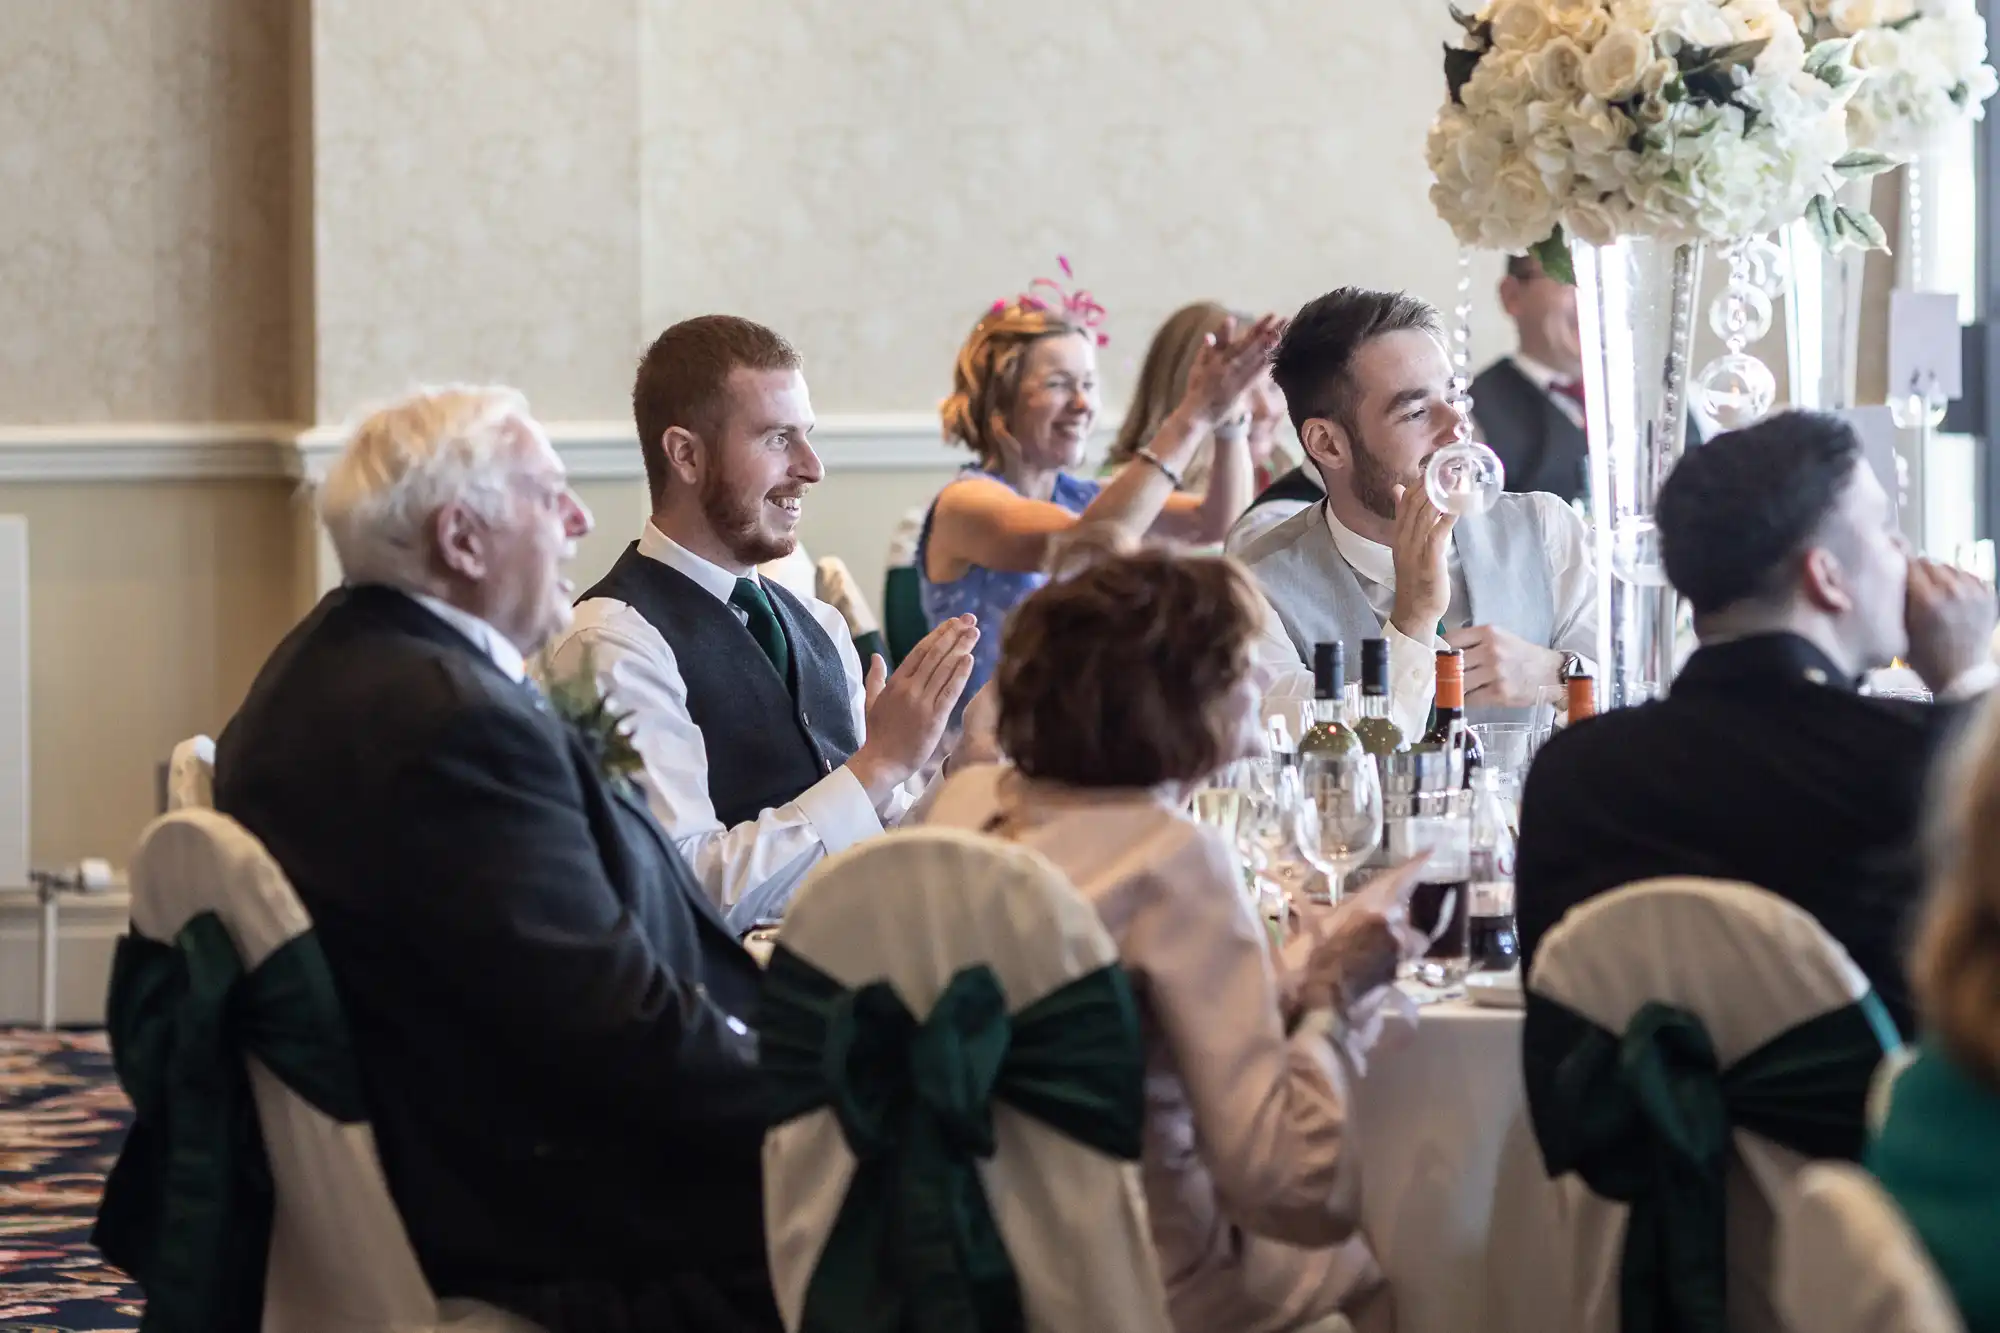 Guests at a wedding reception, clapping and smiling, seated around tables decorated with white and green floral arrangements.